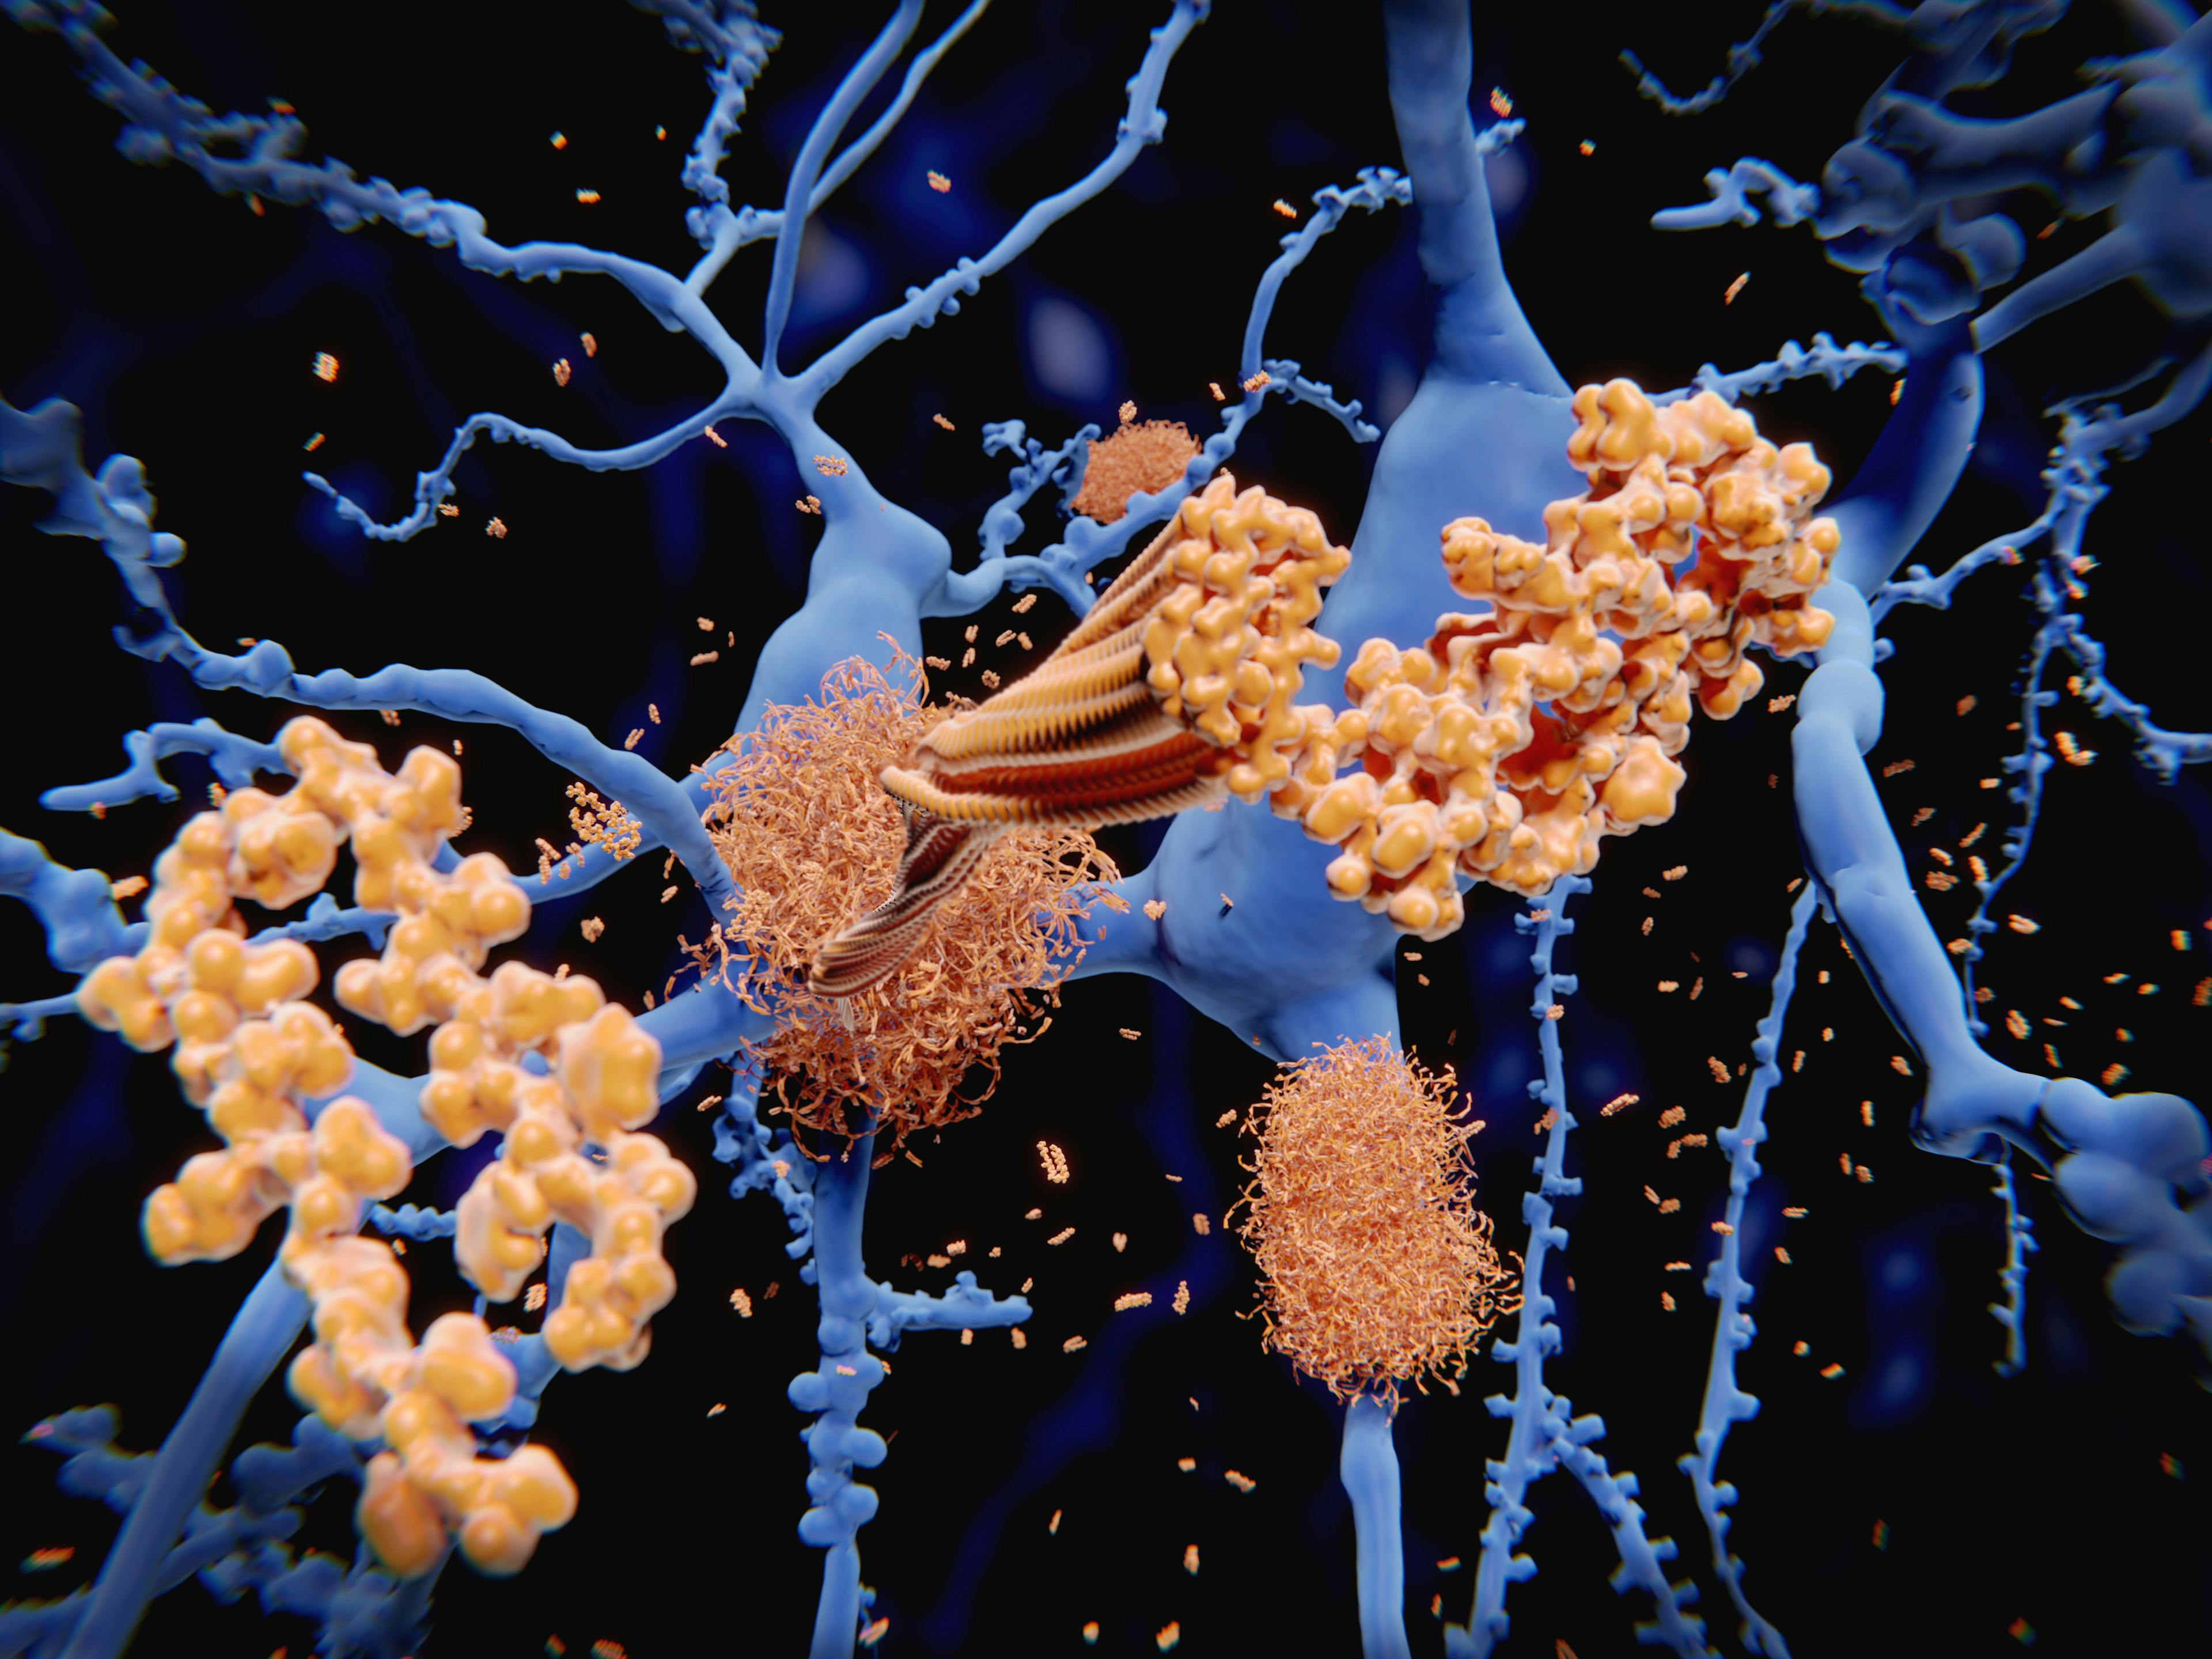 ICER To Assess Aduhelm, Other Monoclonal Antibody Treatments for Alzheimer's  in 2022